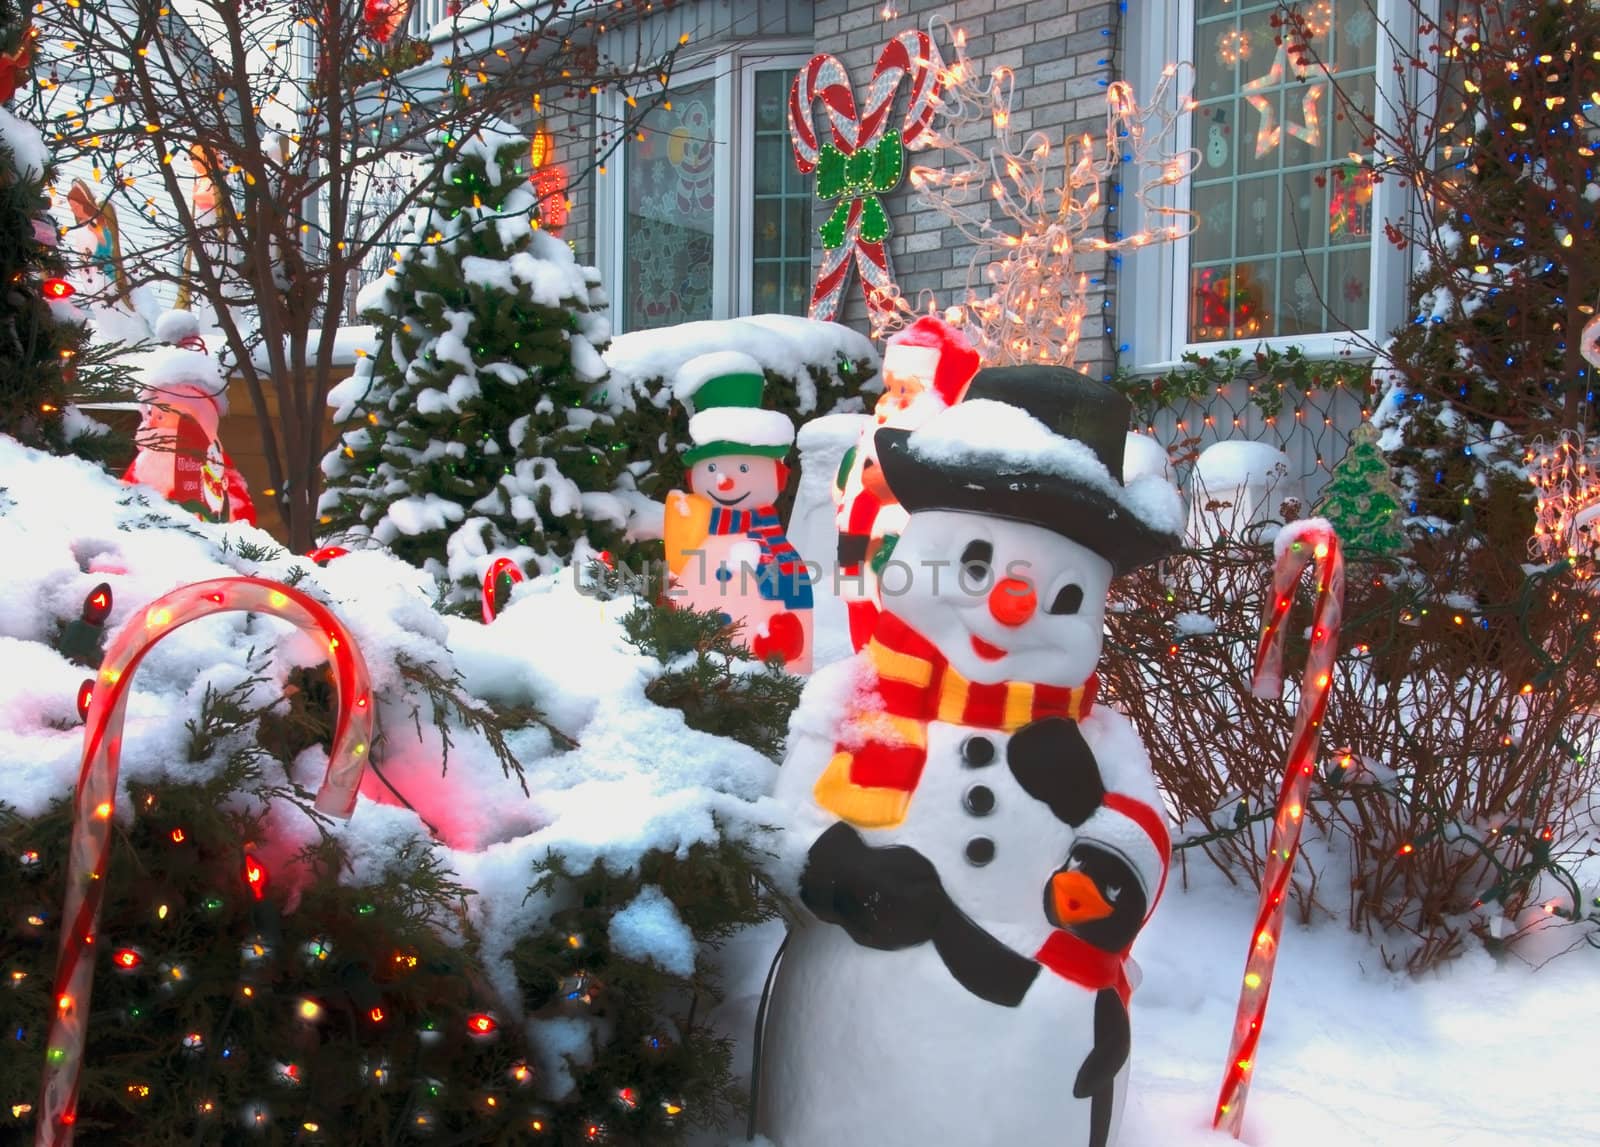 A home near the North Pole is decorated for Christmas with candy canes, sonowmen, lights and much more.